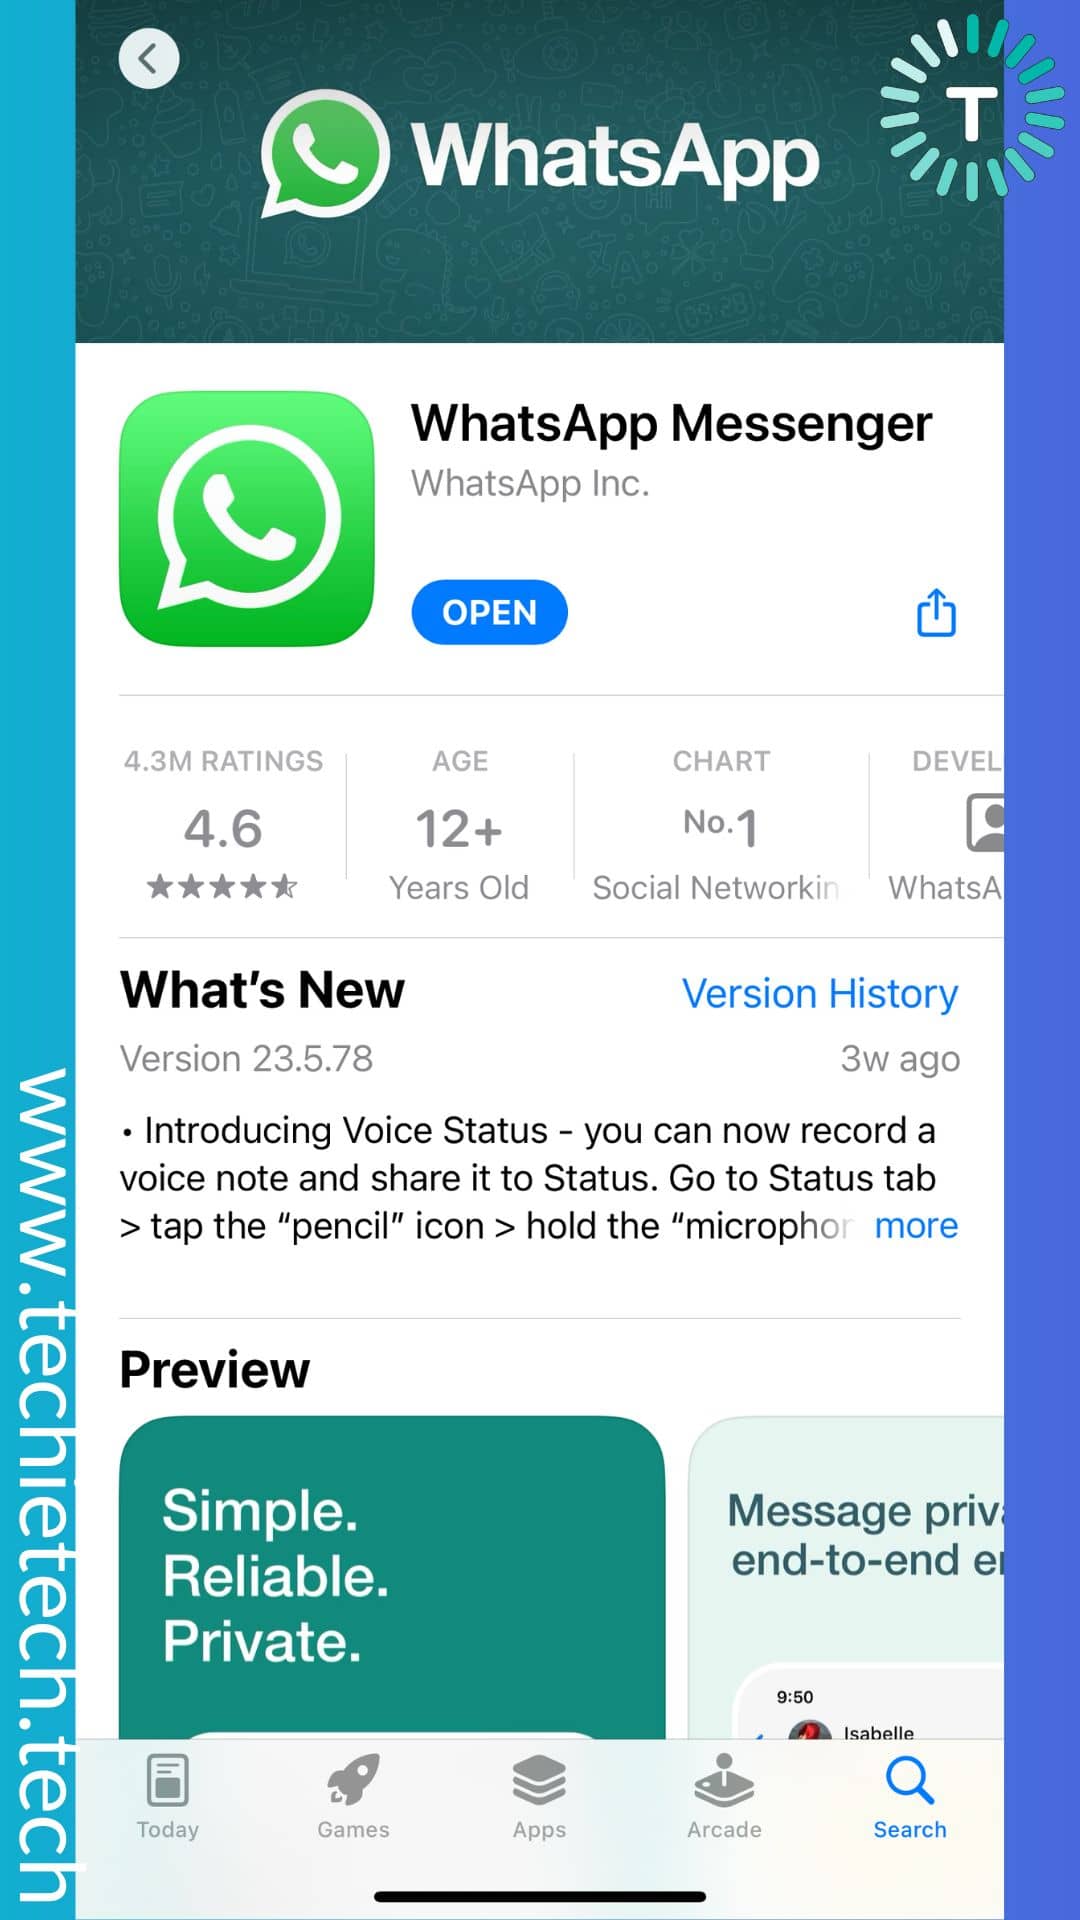 WhatsApp page on App Store